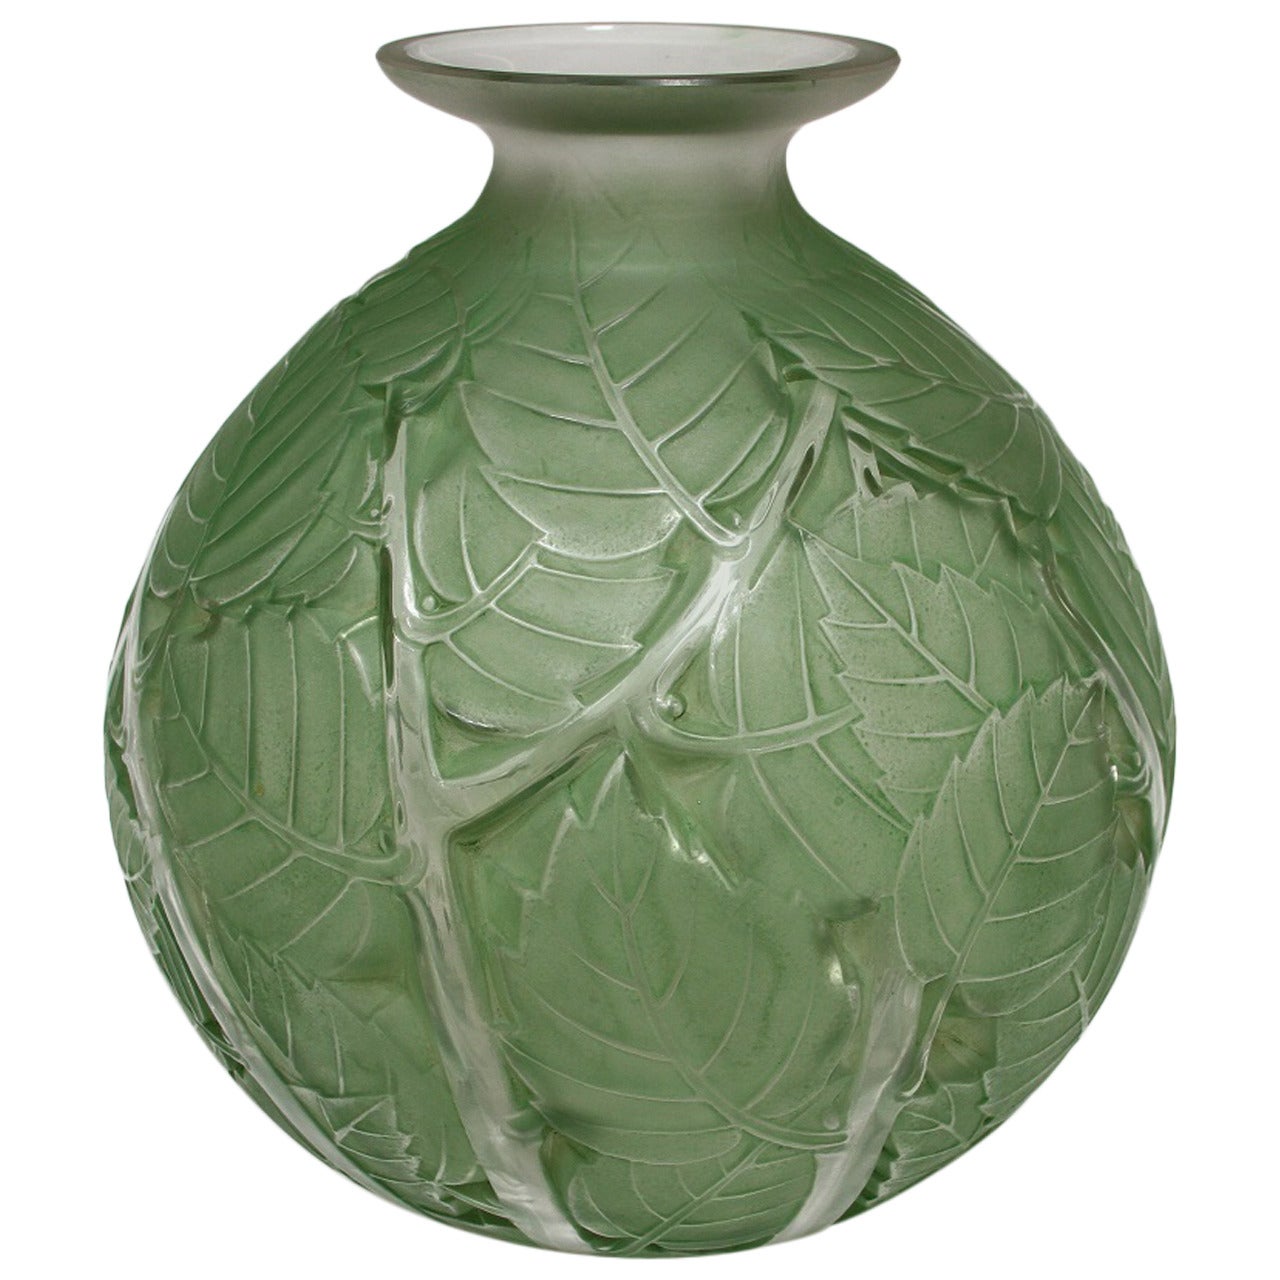 Rene Lalique "Milan" Glass Green Stain Vase For Sale